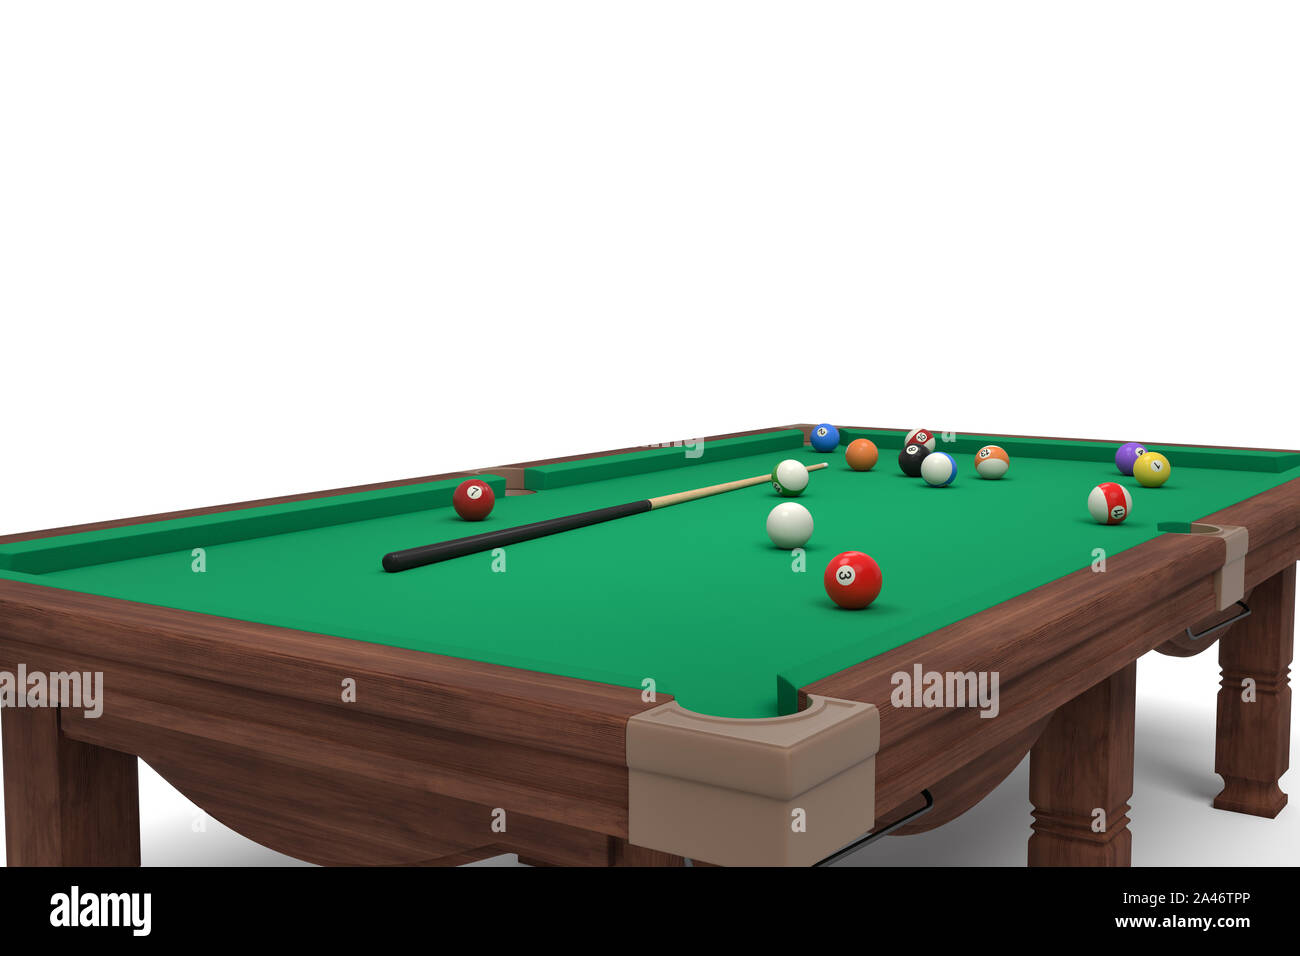 3d rendering of an isolated billiard table in side angle view with a cue stick lying on the surface surrounded by many numbered balls